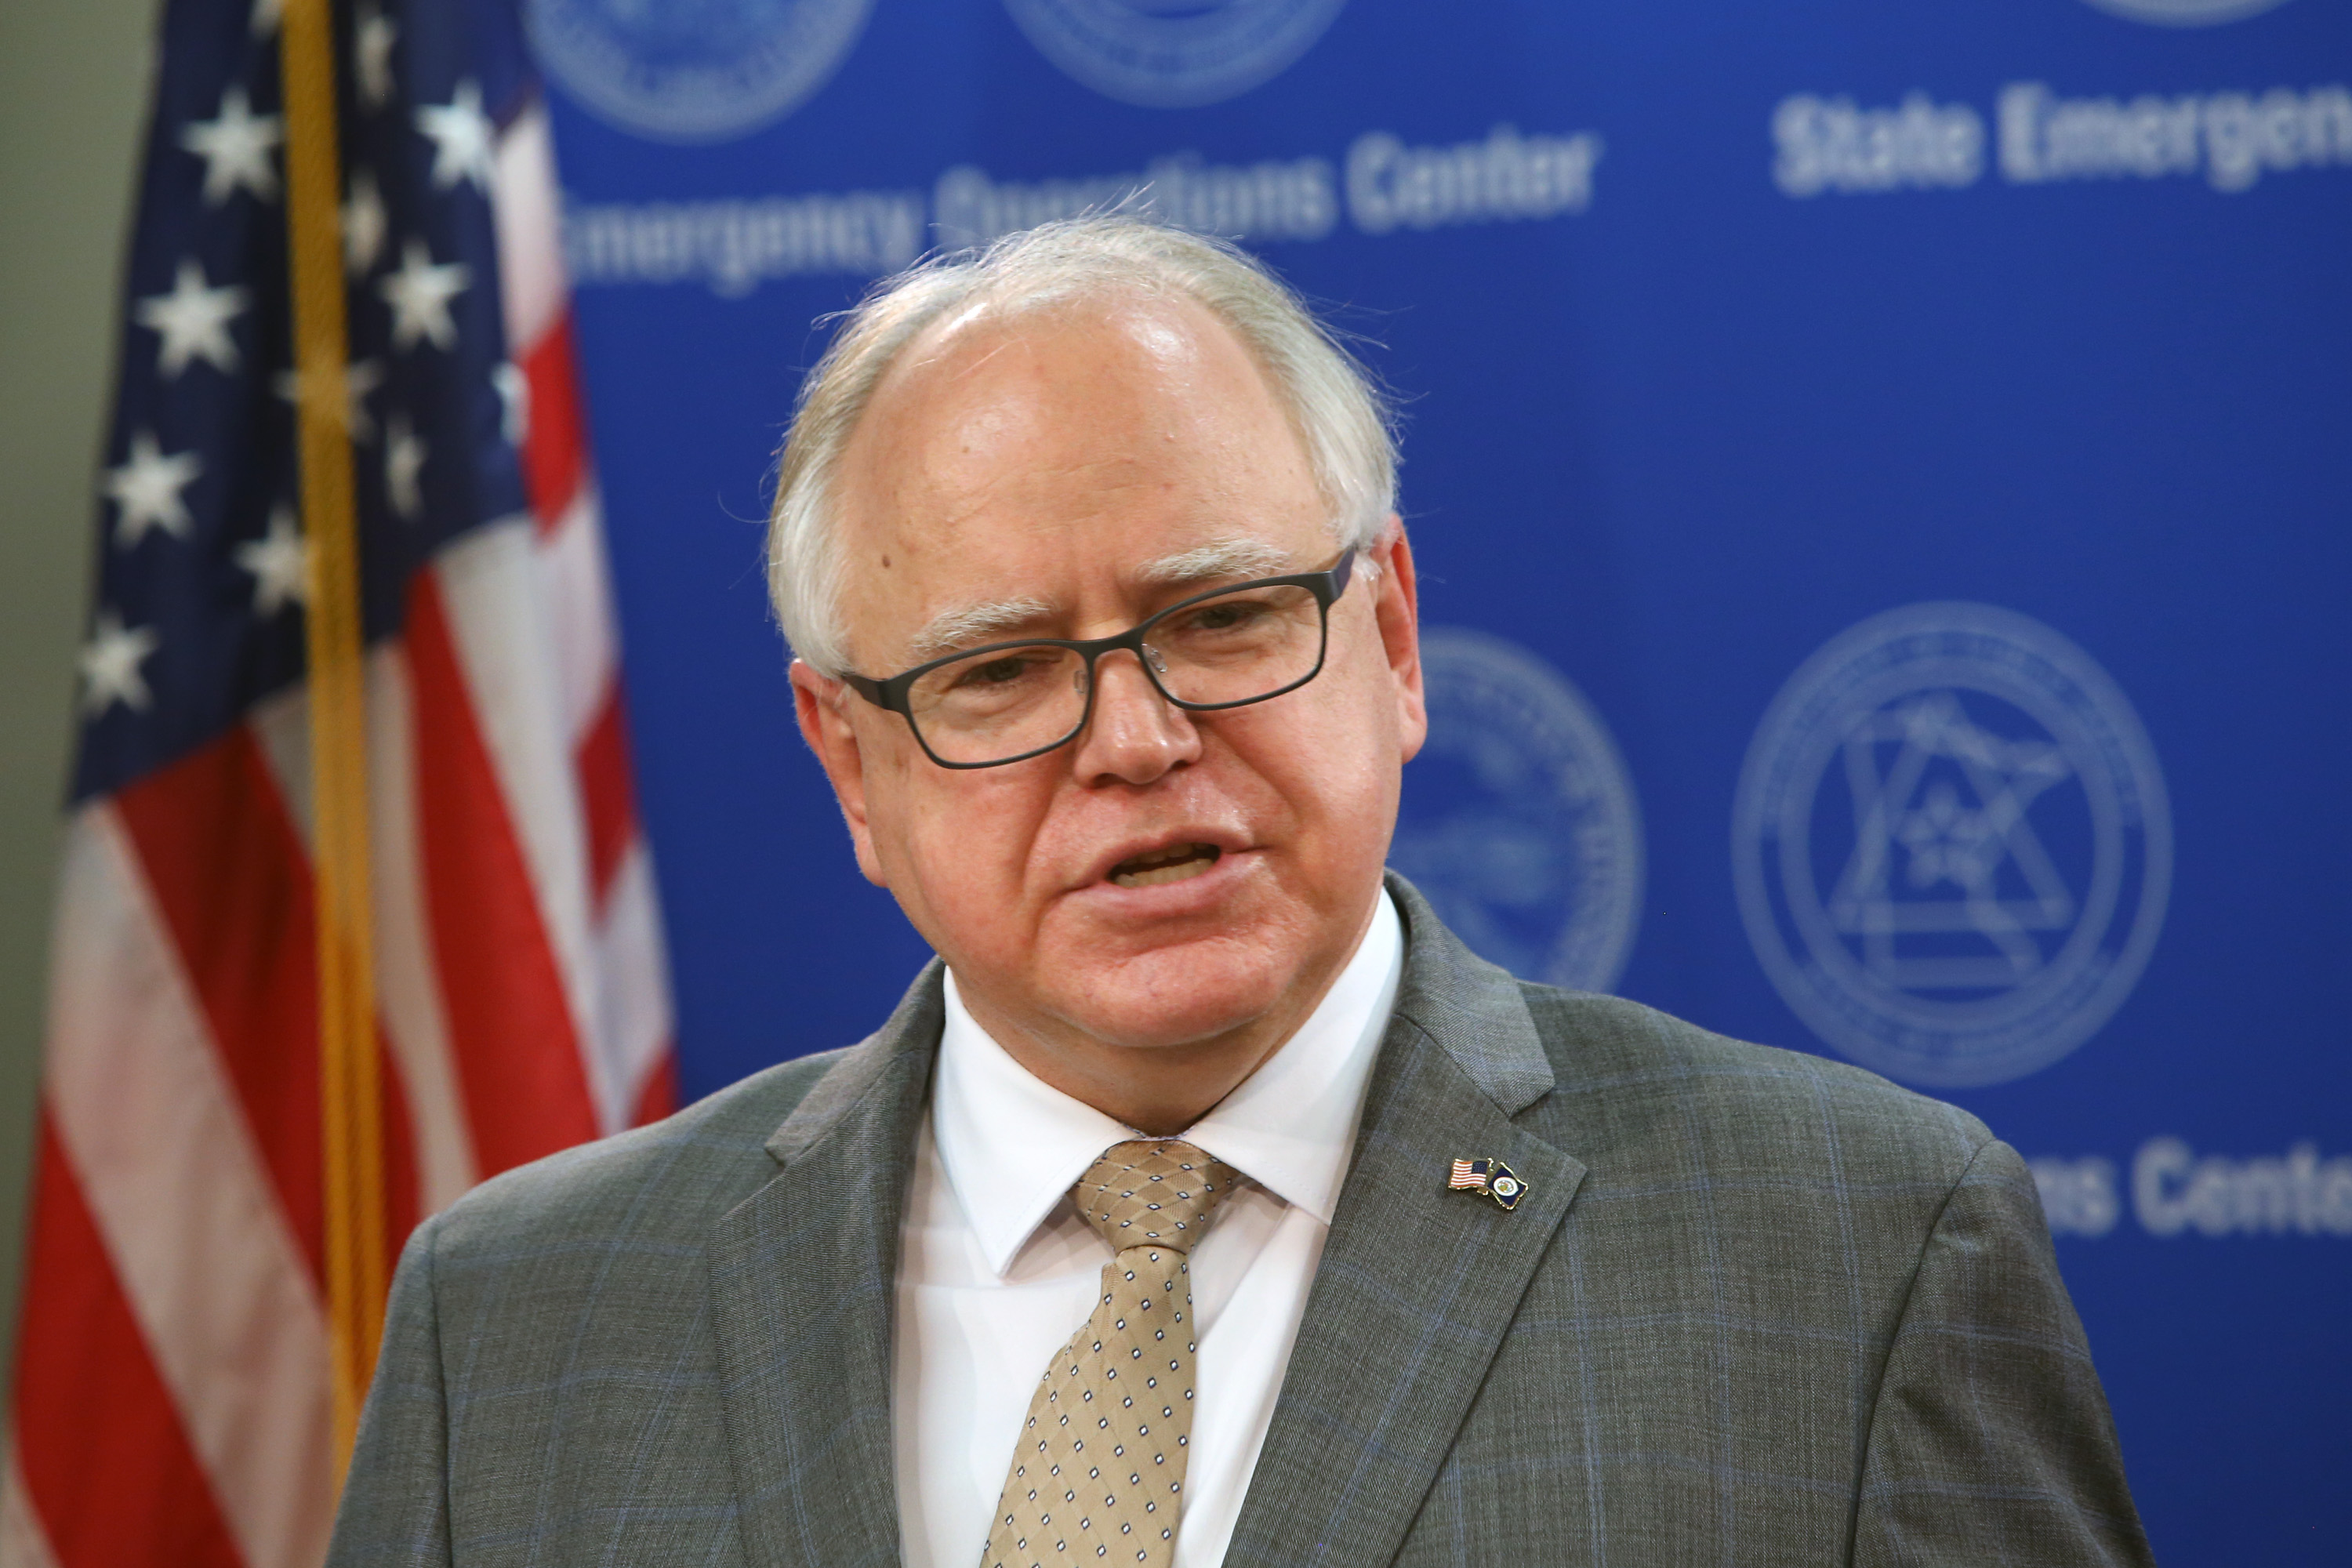 minnesota-governor-tim-walz-edges-out-all-potential-gop-challengers-poll